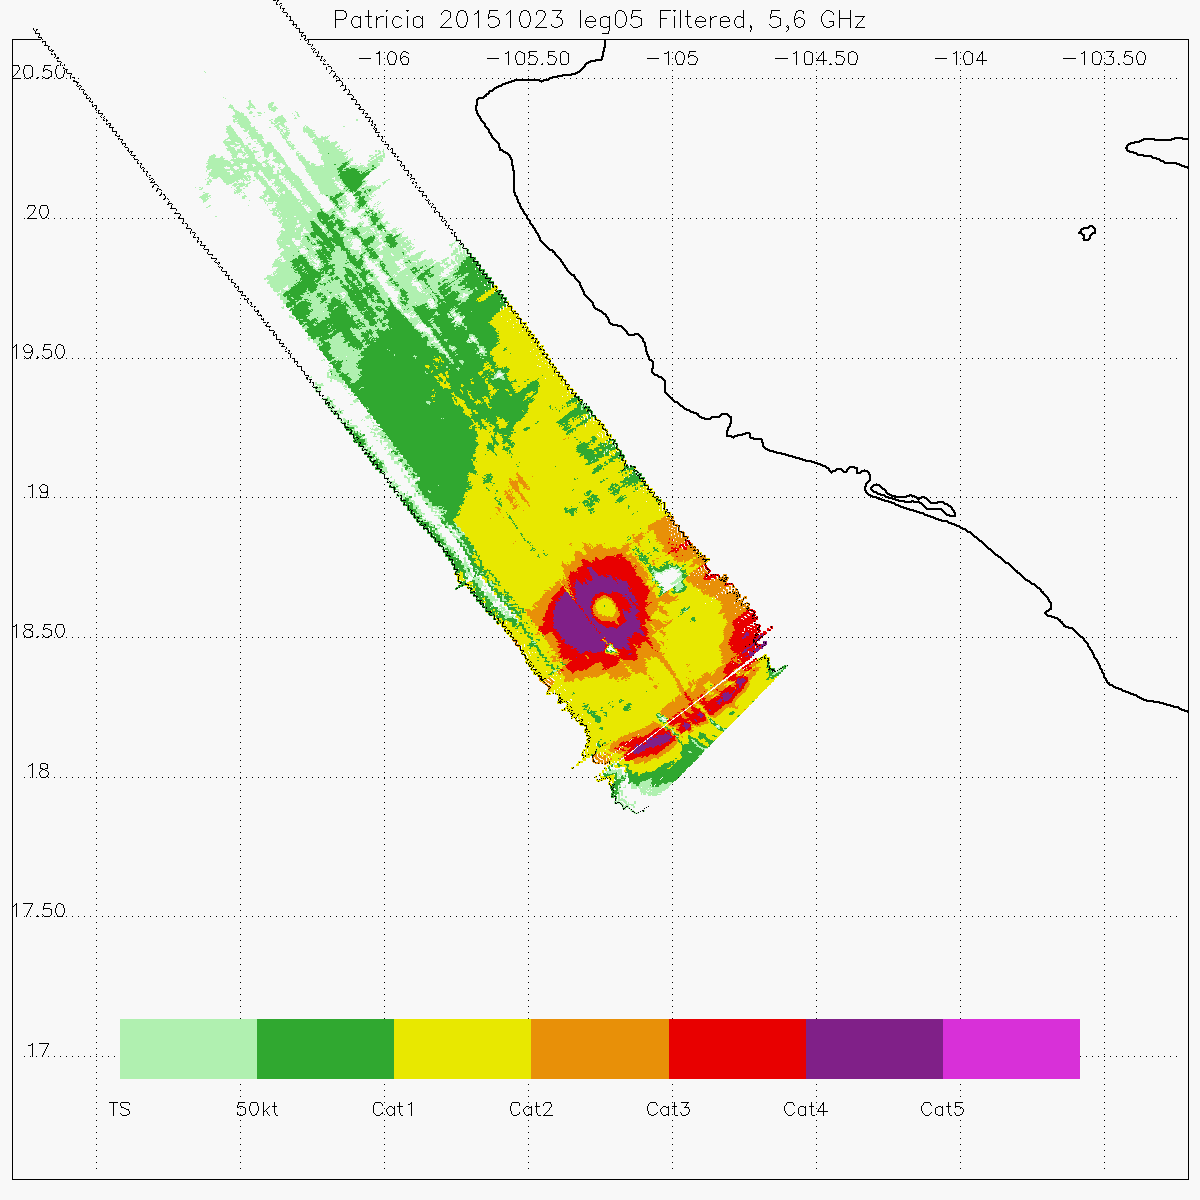 A rough HIRAD wind speed retrieval from Hurricane Patricia a few hours before its landfall in Mexico.